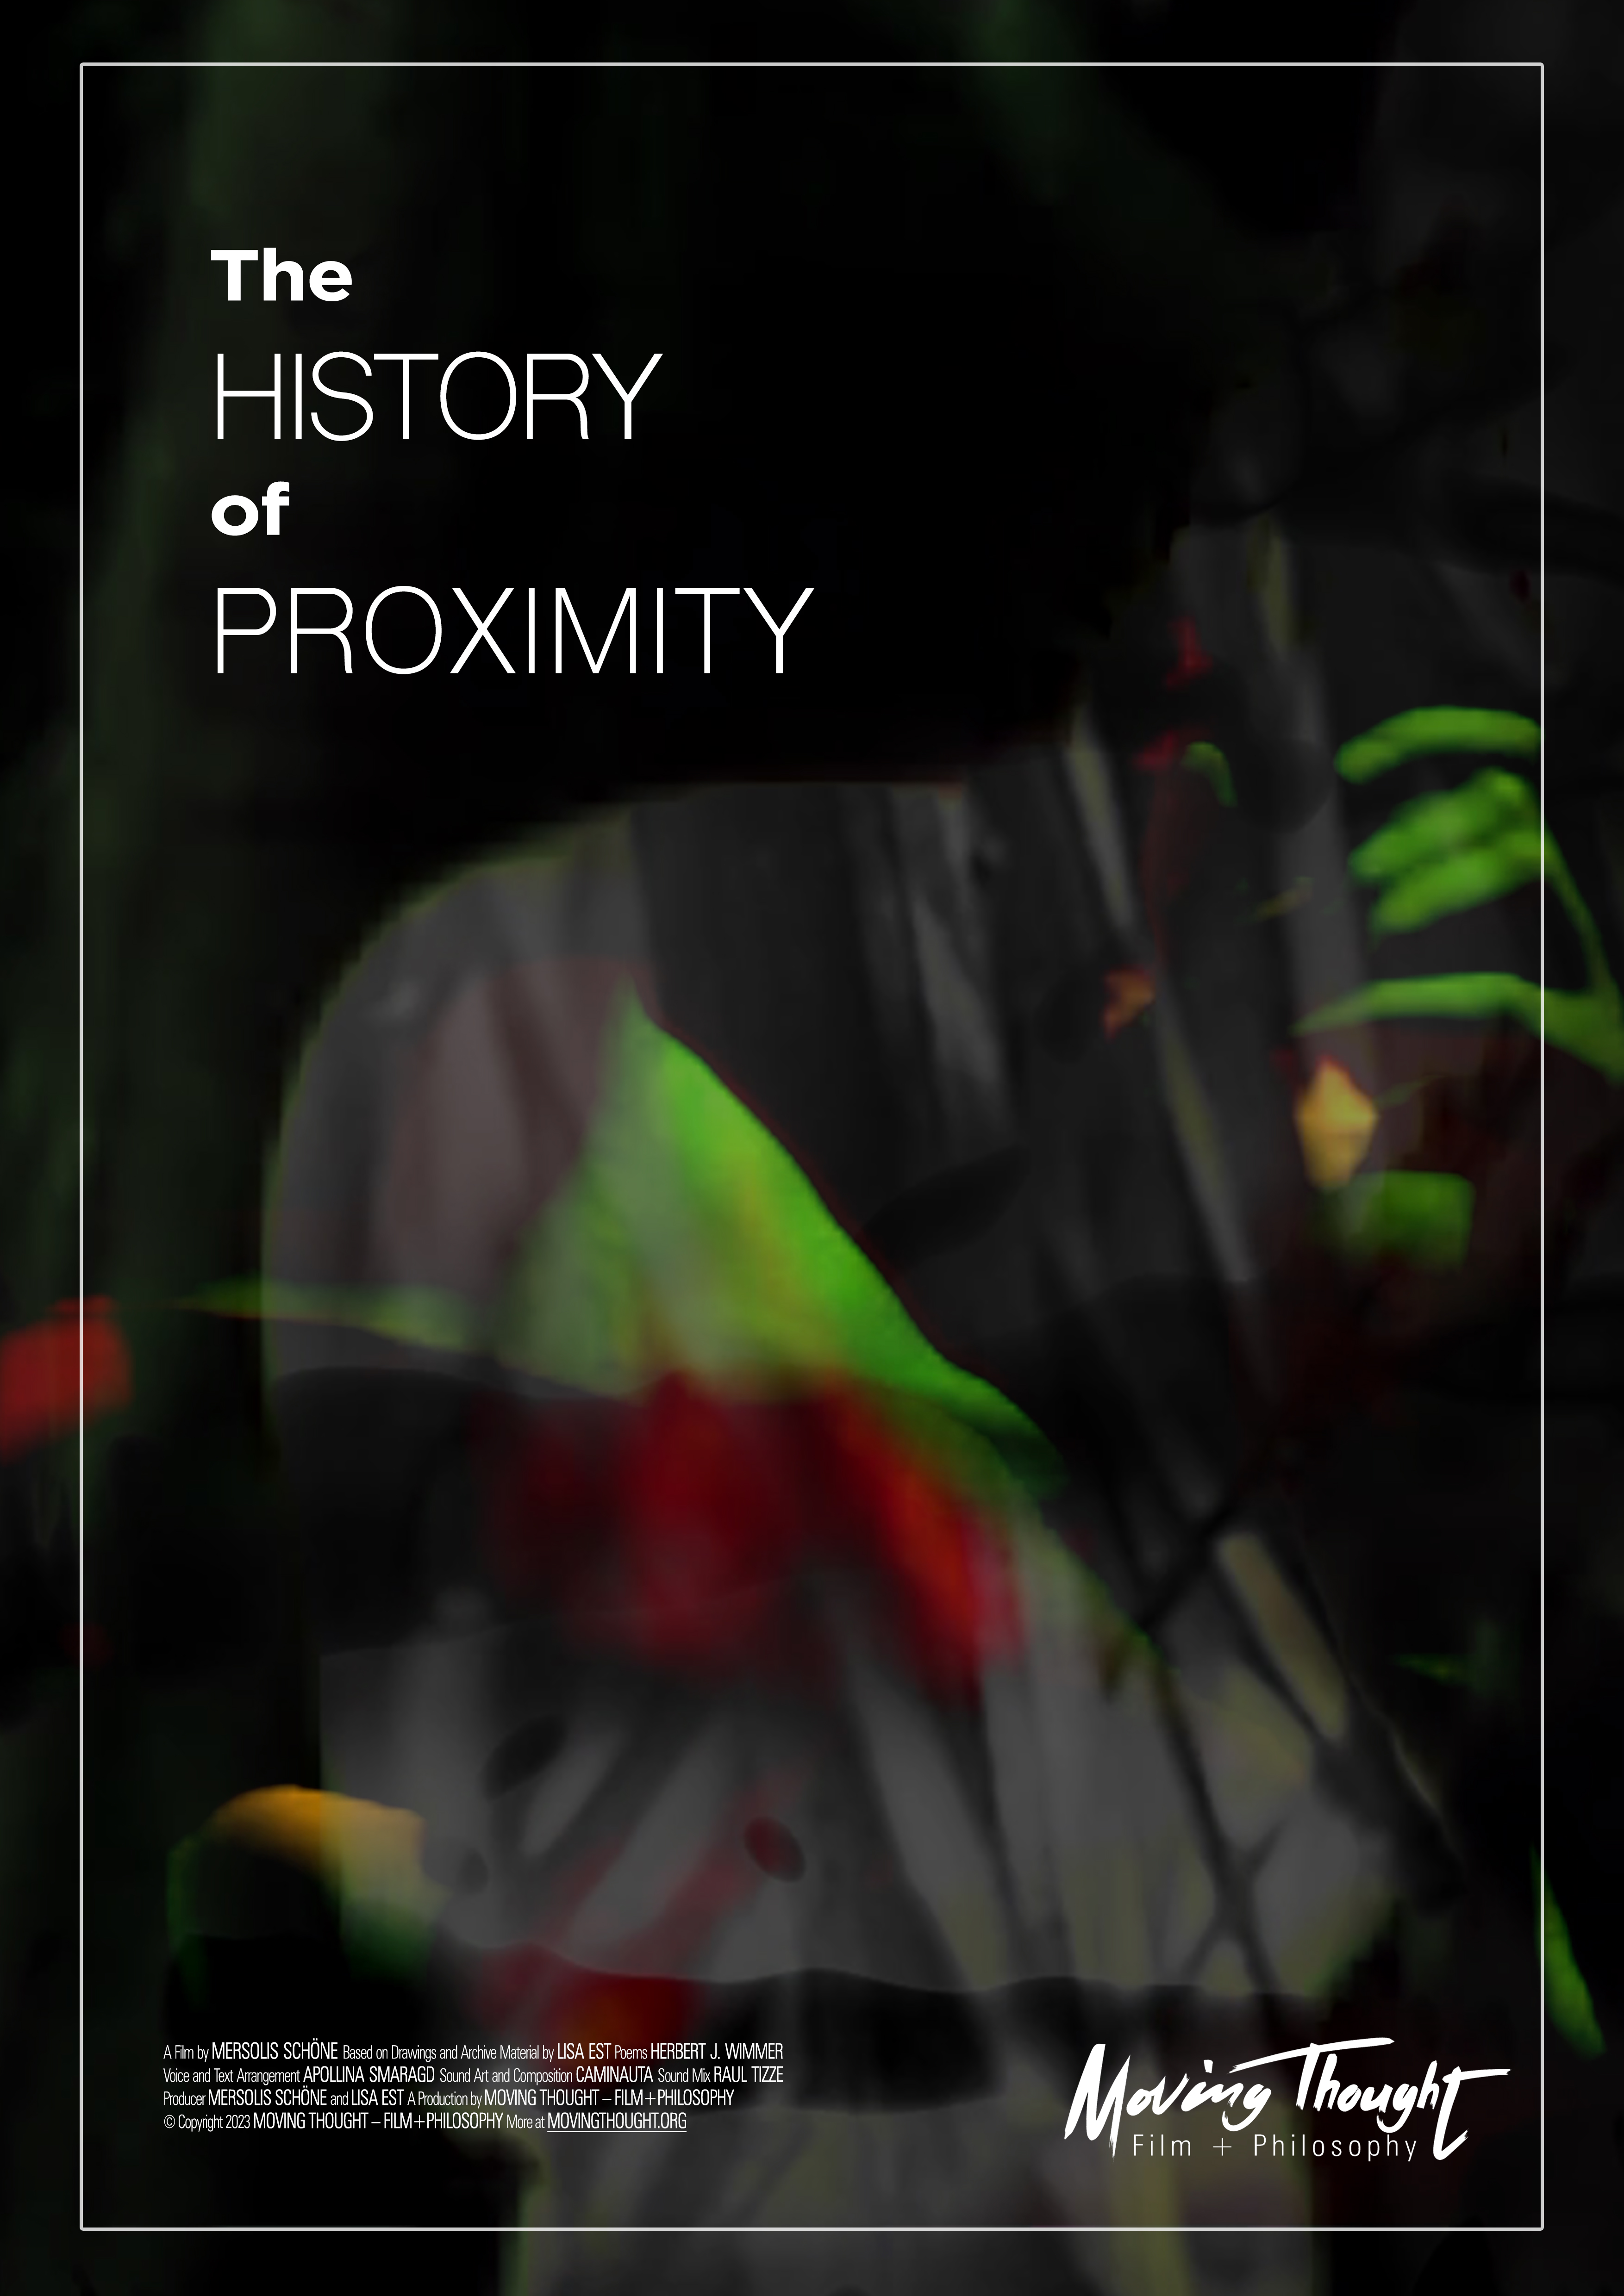 The History of Proximity (Poster) - by Mersolis Schöne with Lisa Est, Herbert J. Wimmer, Caminauta, Apollina Smaragd